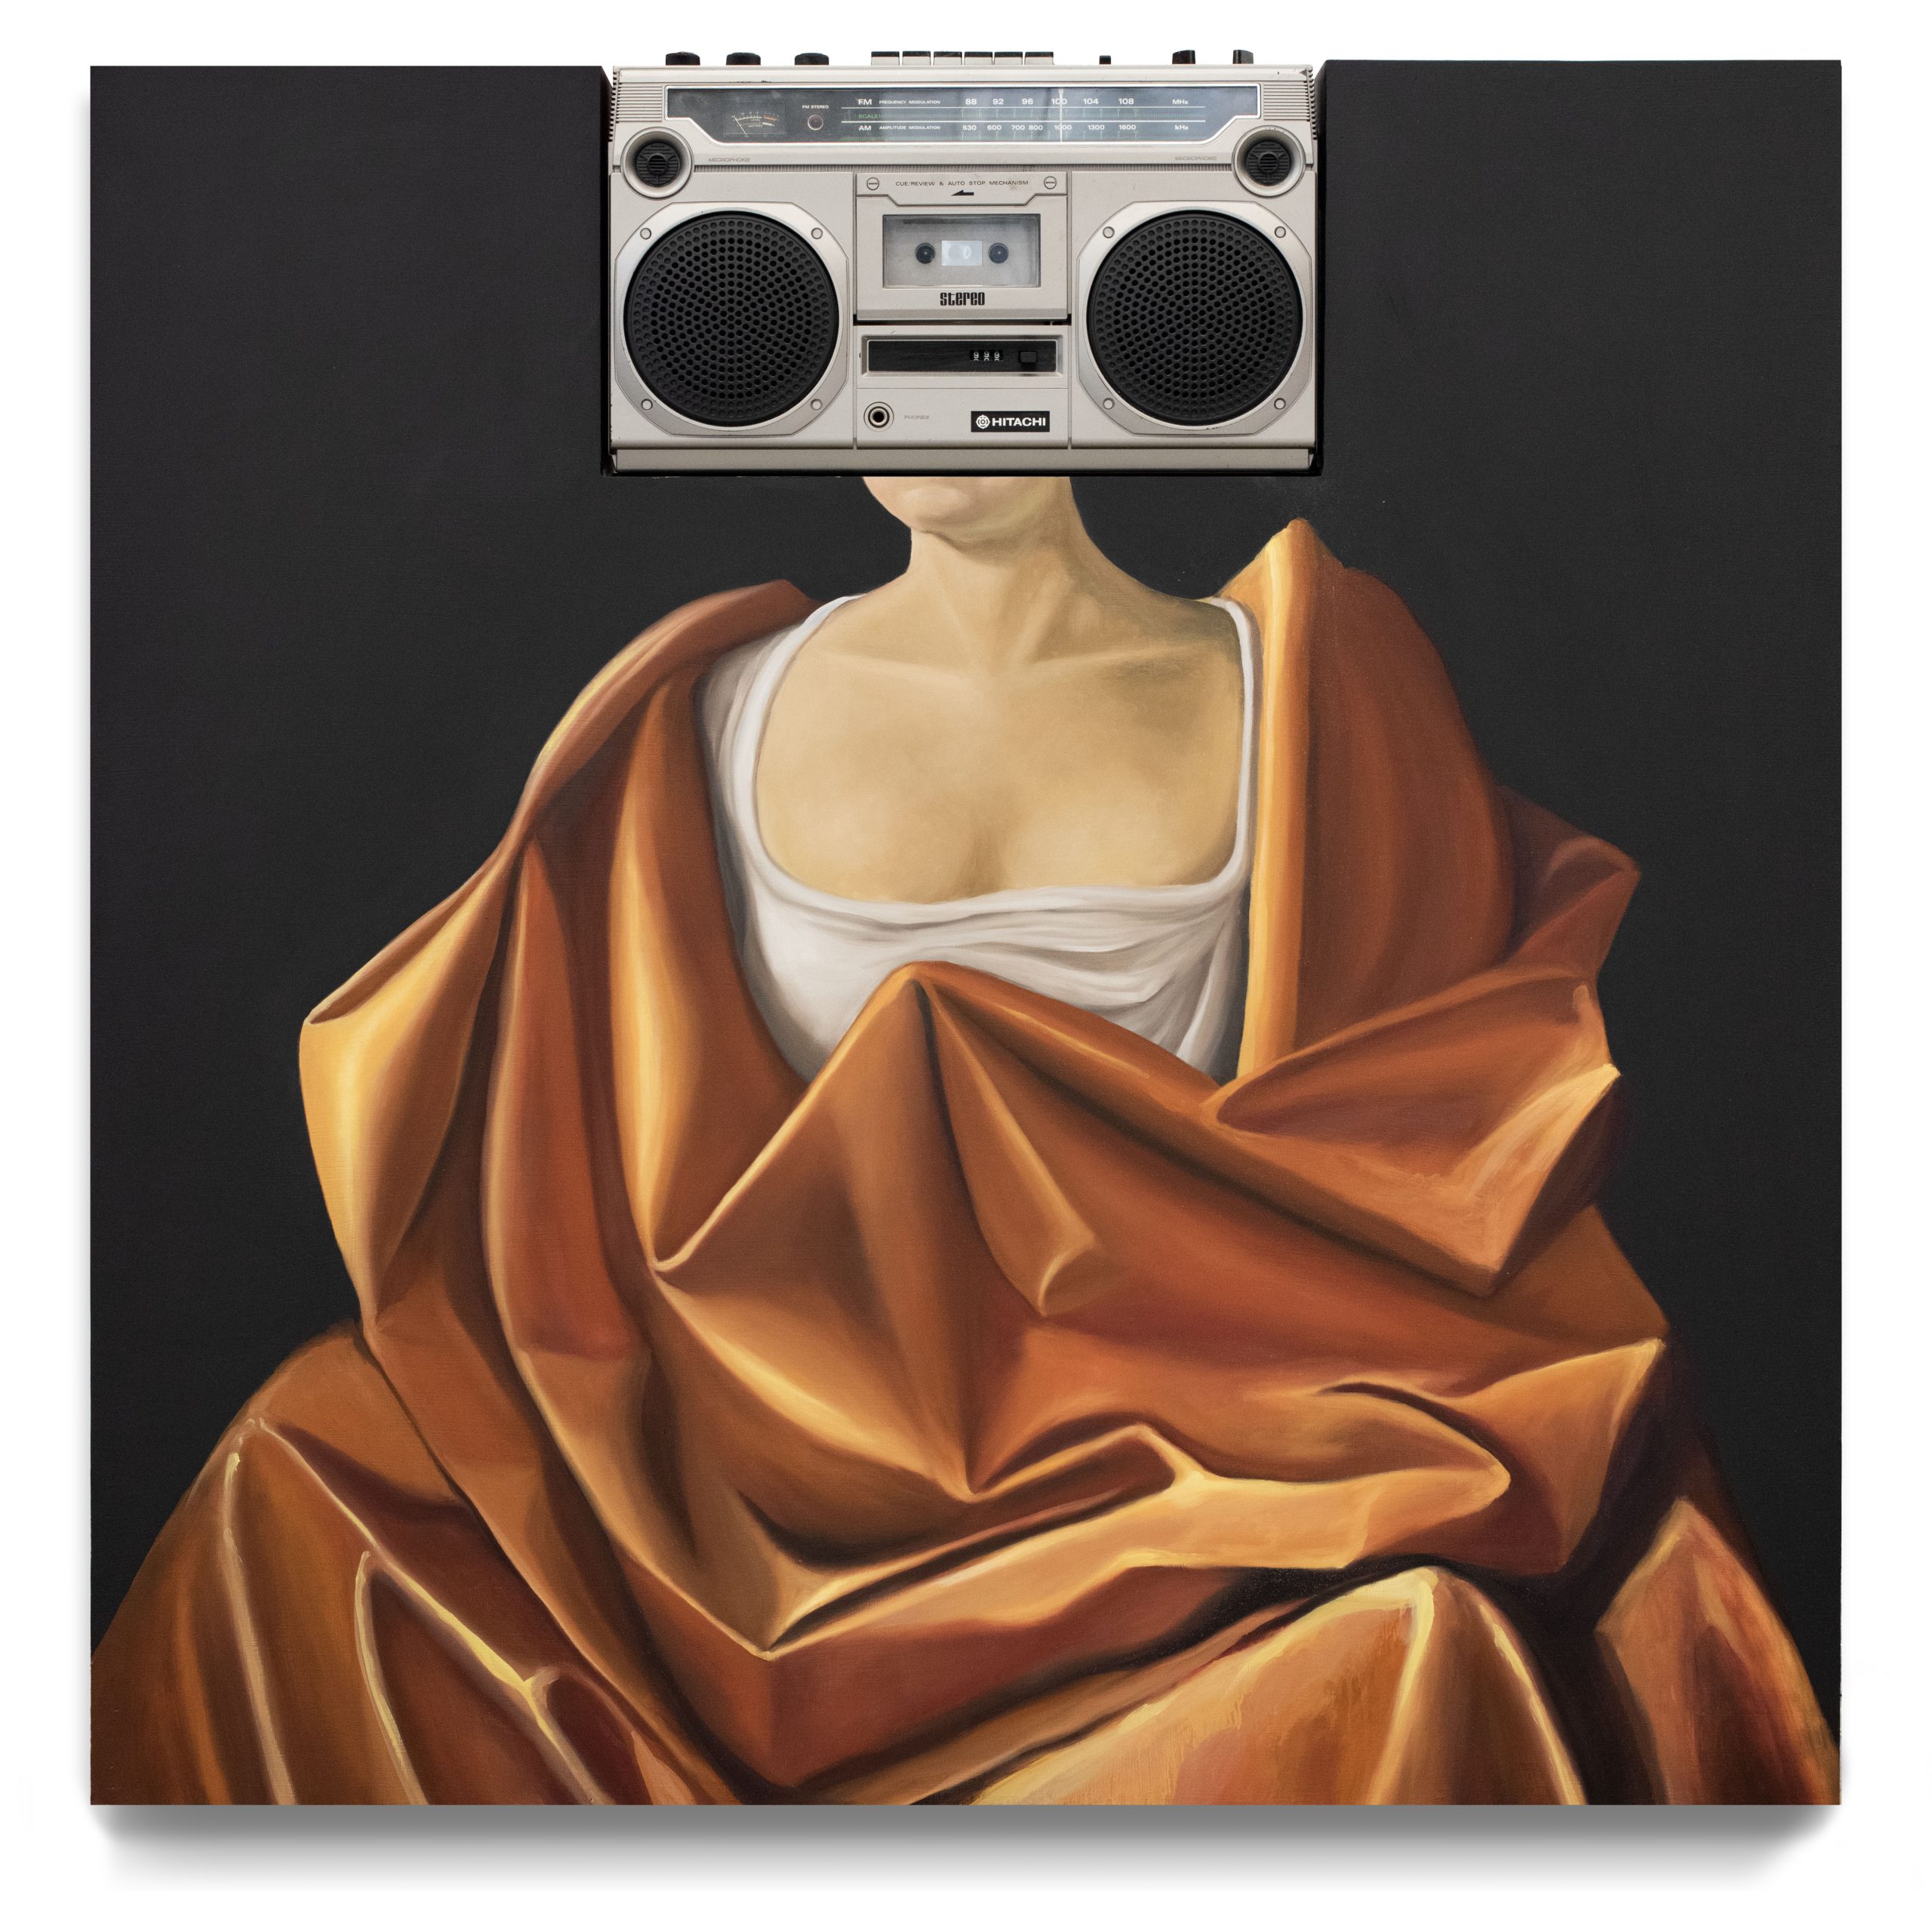 painting of a woman wrapped in an orange blanket. the custom panel is cut out so that a stereo is where her head should be